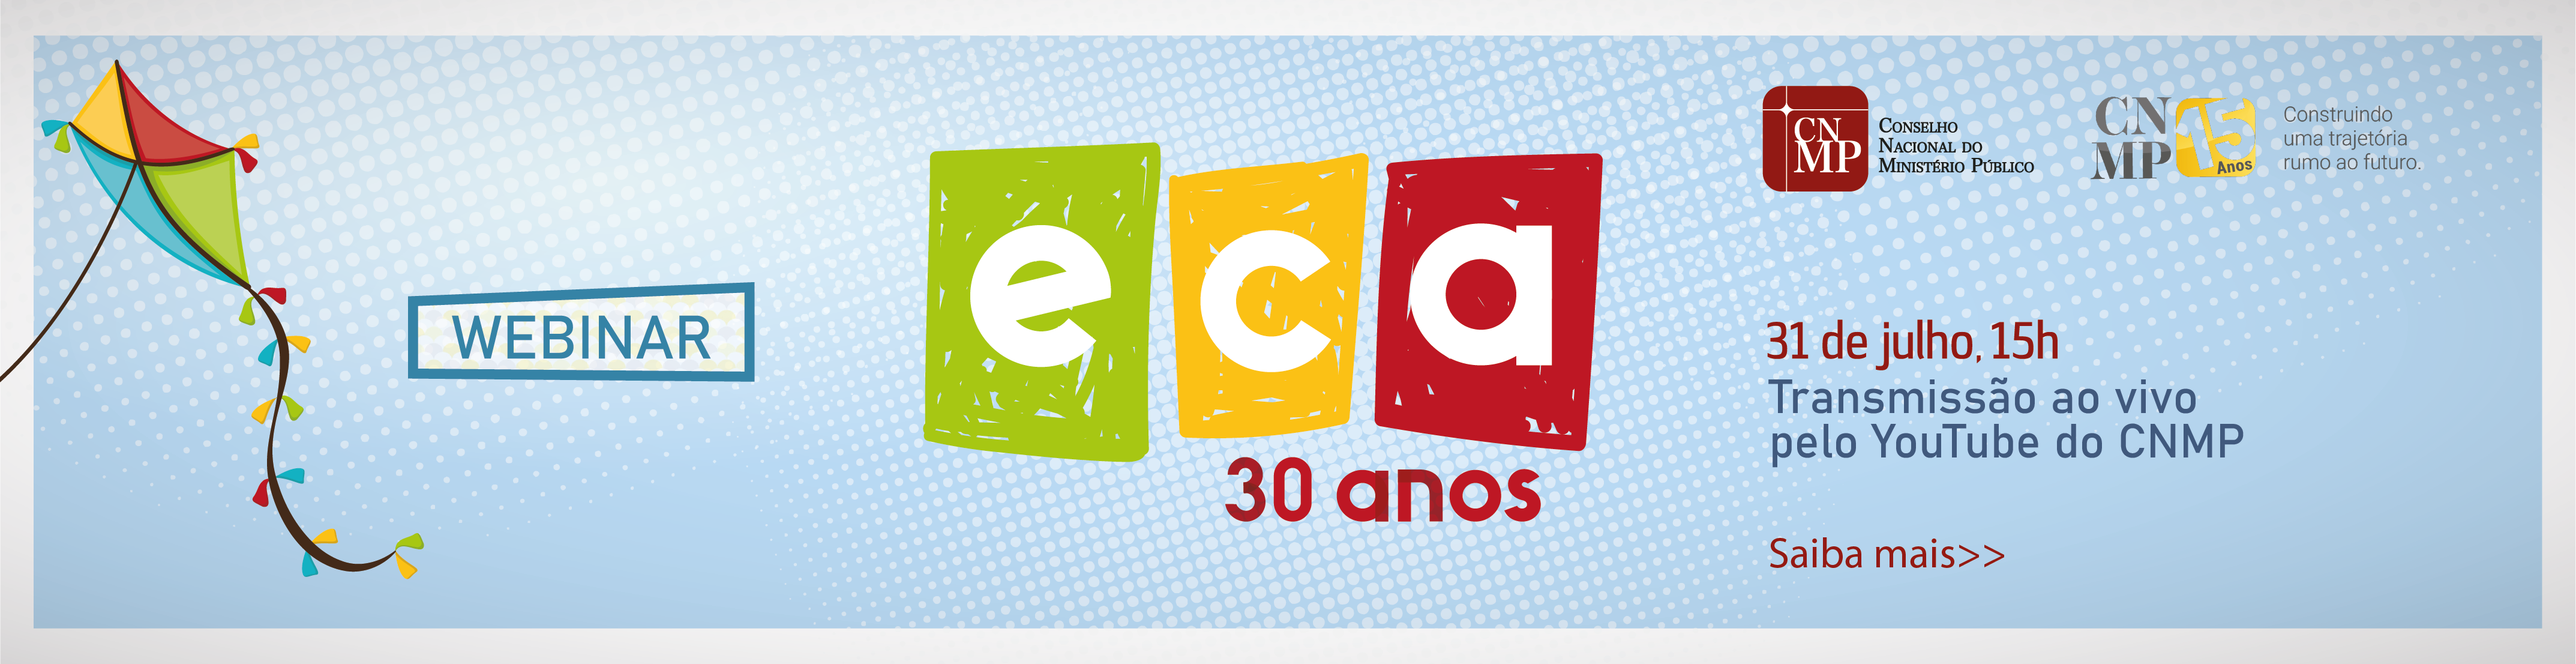 Banner_eca30anos.png - 1,16 MB